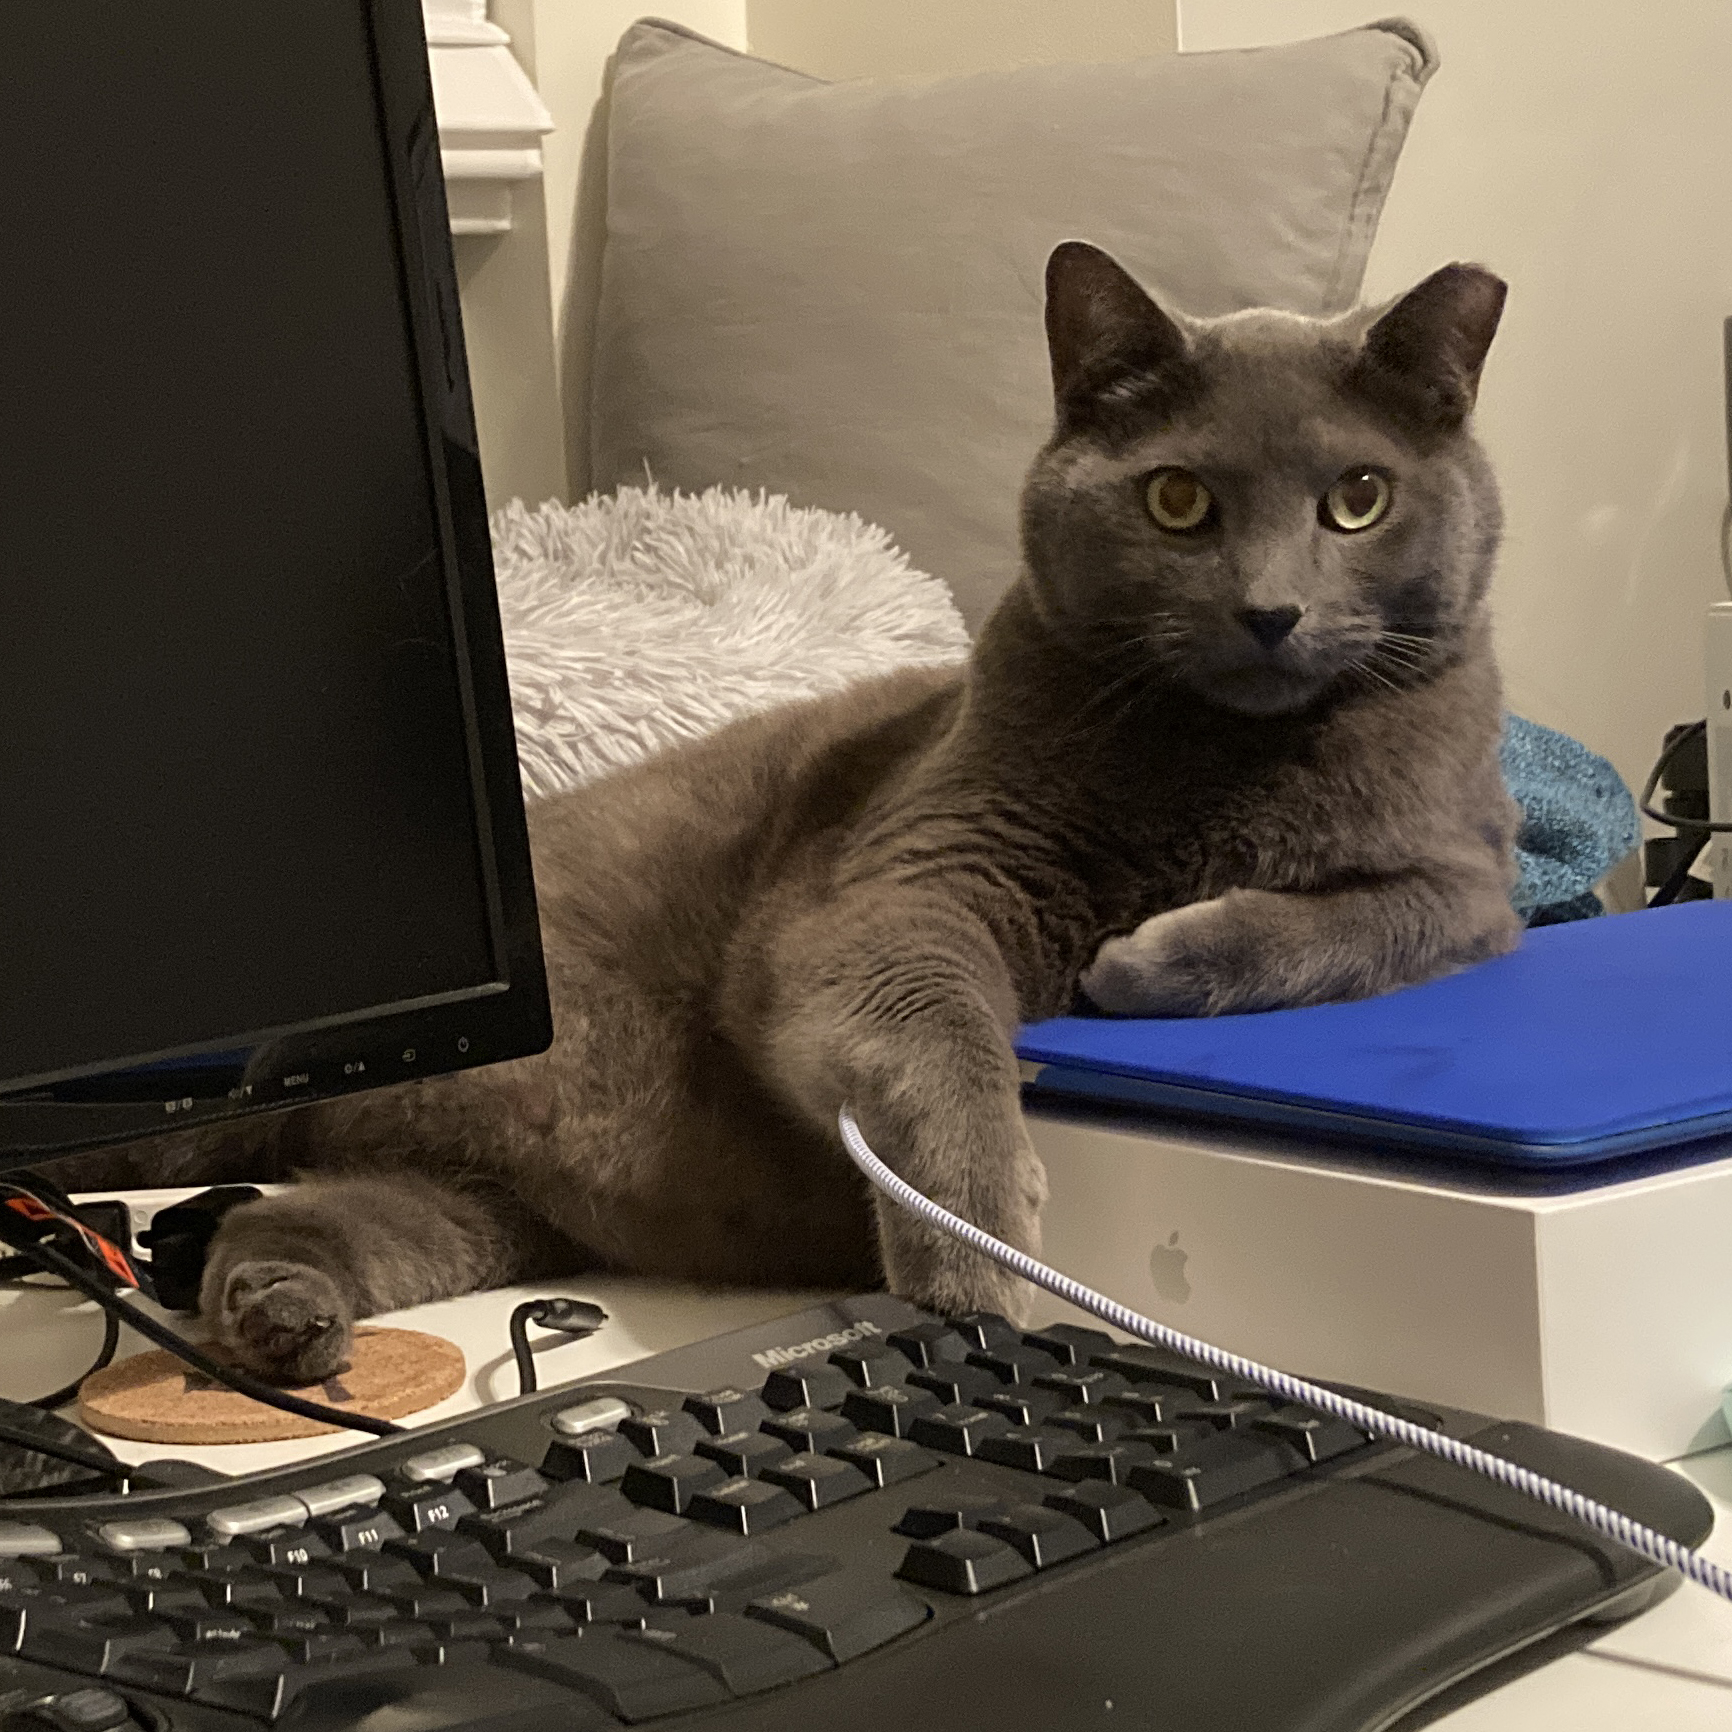 Cat by the computer